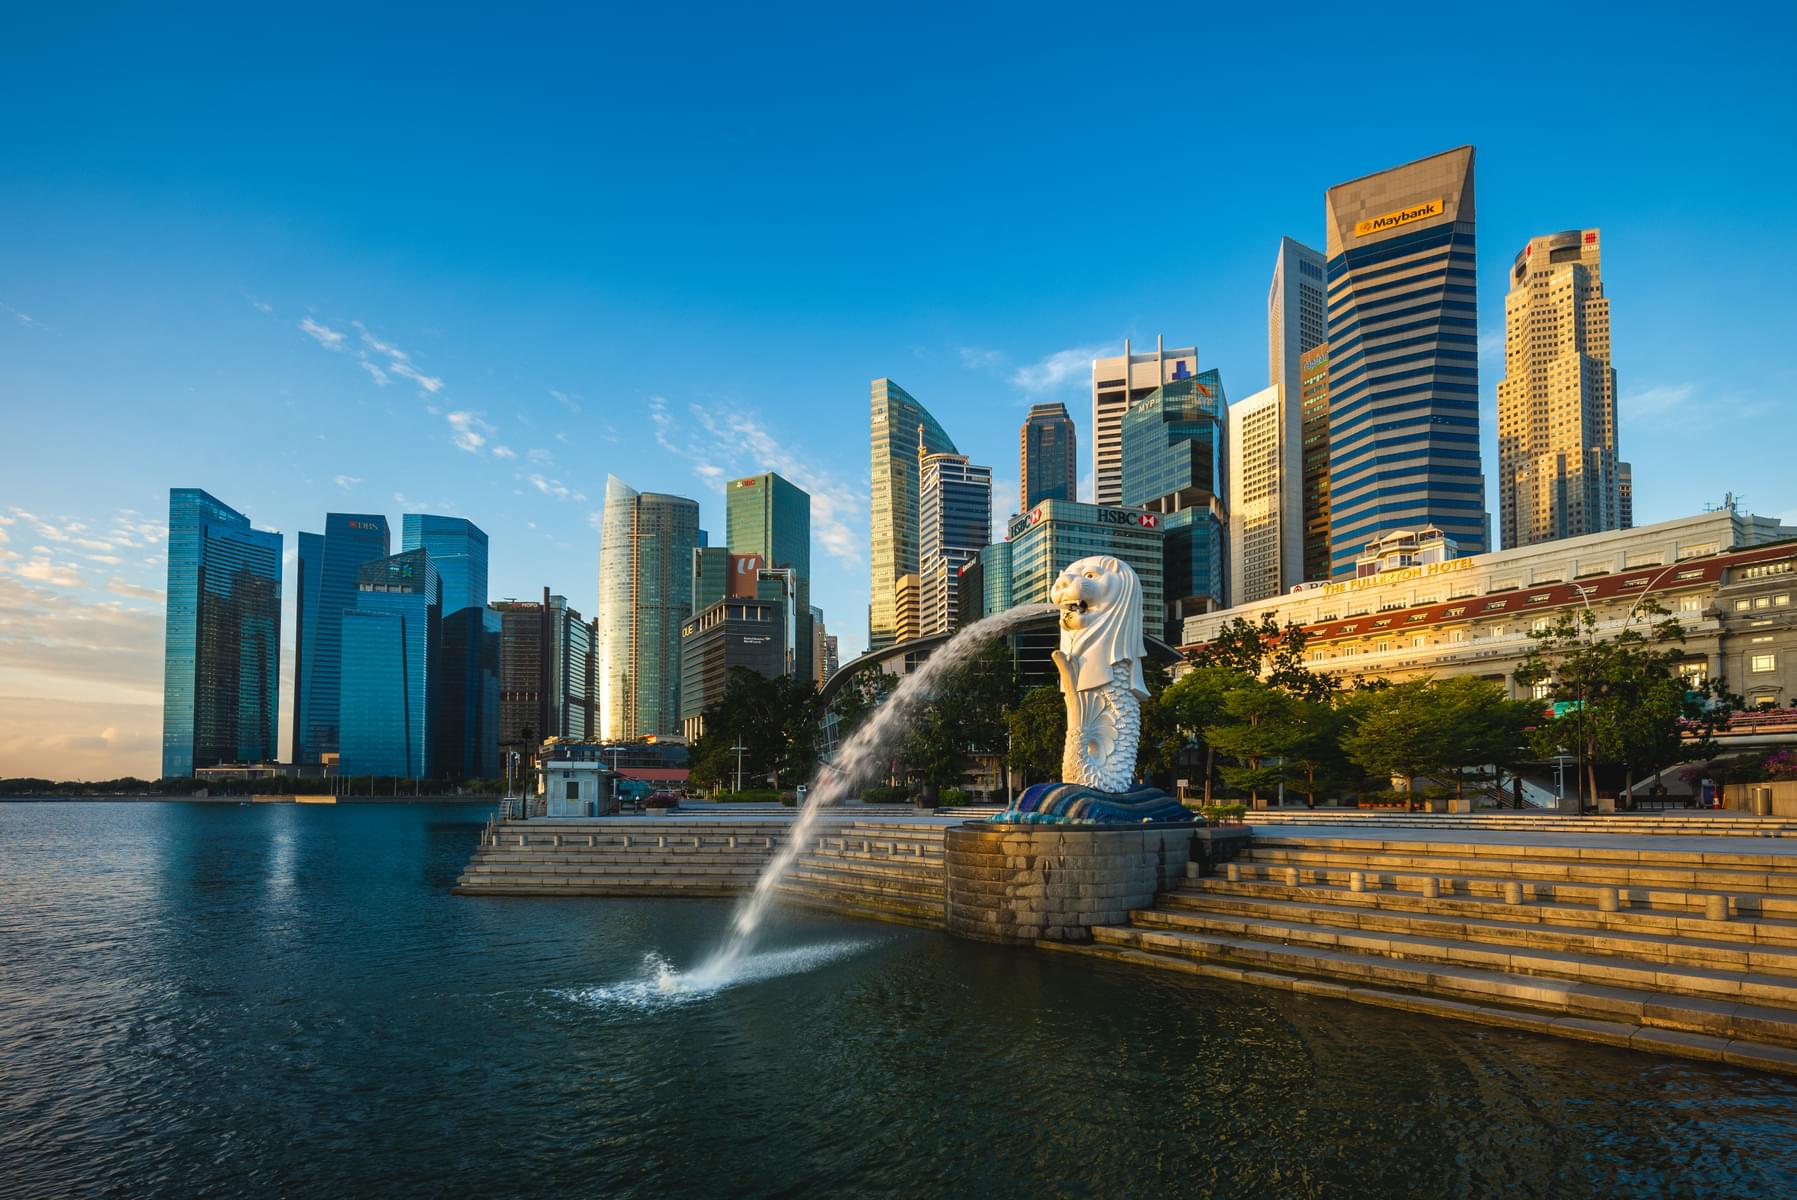 Get on an exciting tour of the majestic Singapore city and it's attractions